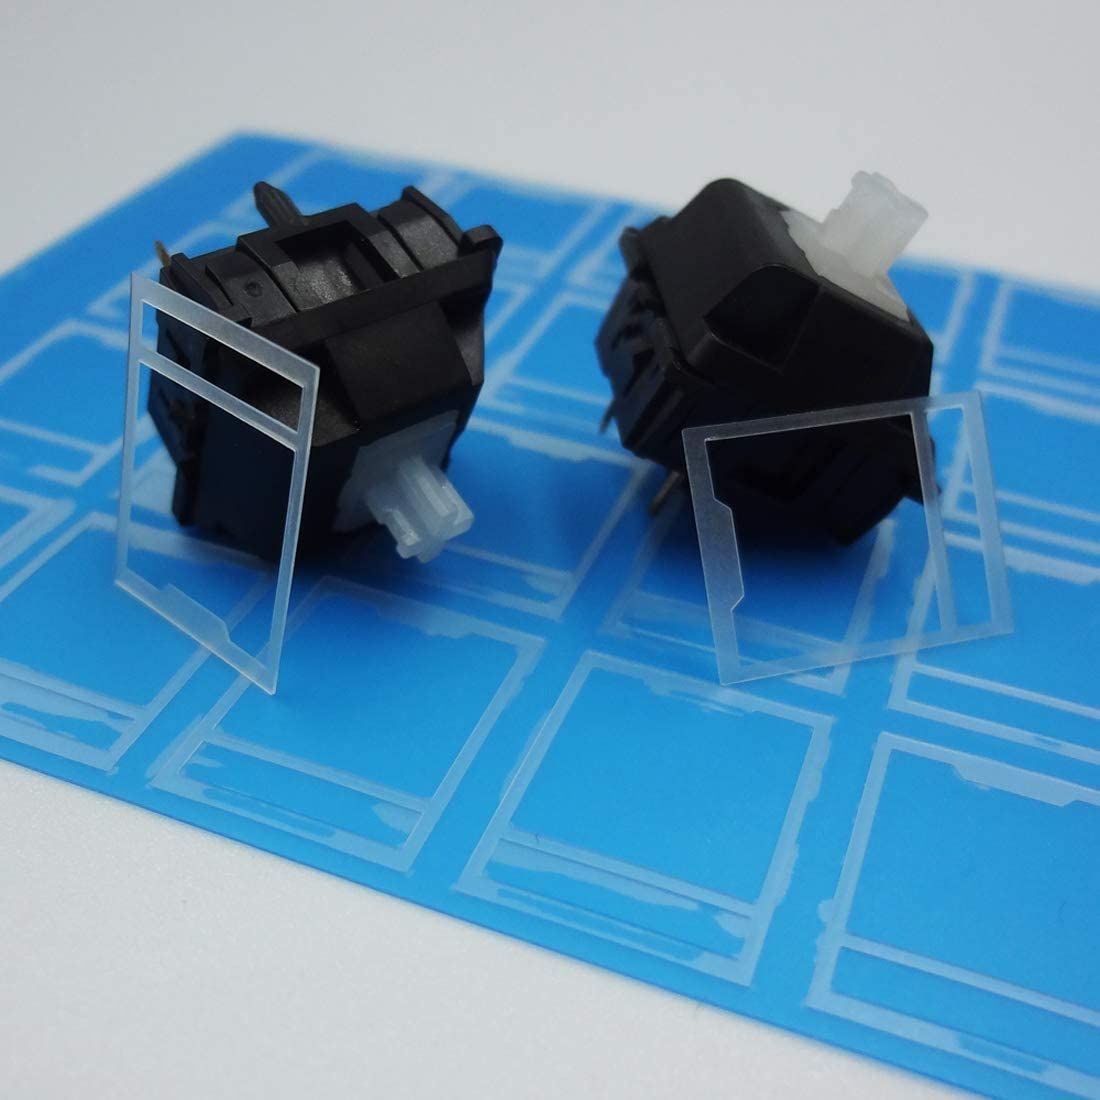 Soft double layer switch film that's compatible with Cherry MX and other similar types of switches.